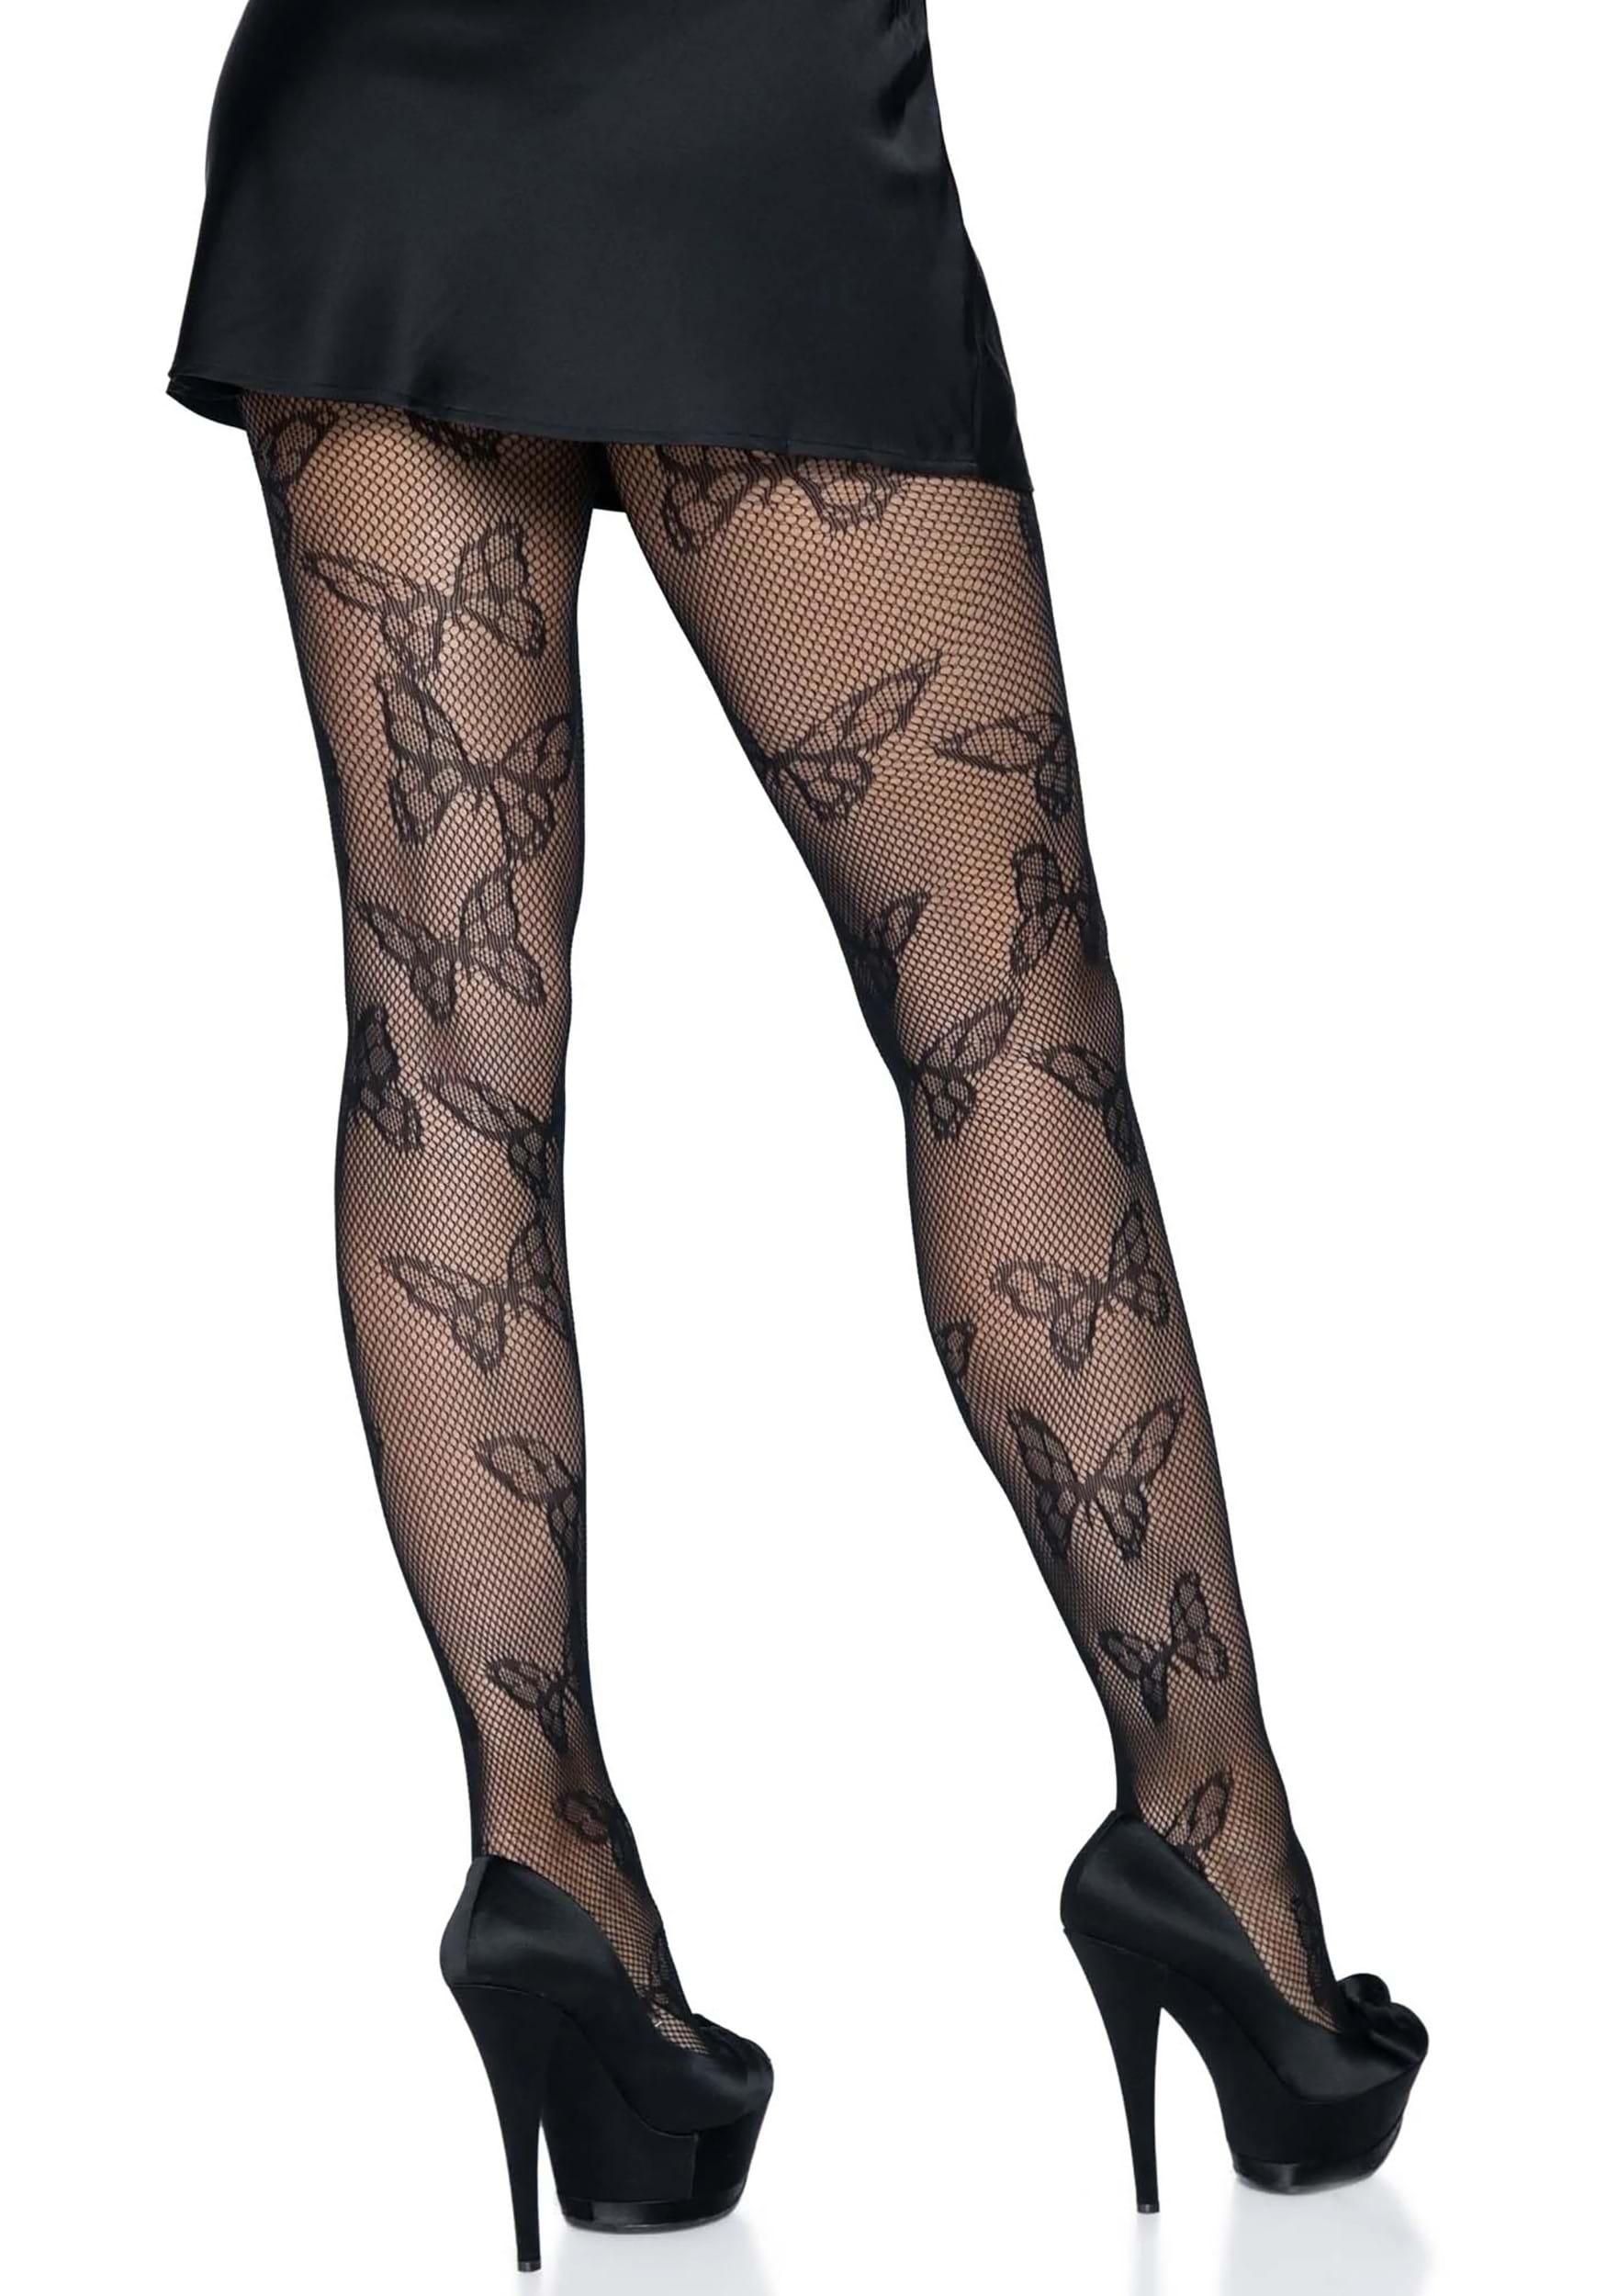 Black fairy tights with rhinestones and yellow butterflies - Virivee Tights  - Unique tights designed and made in Europe